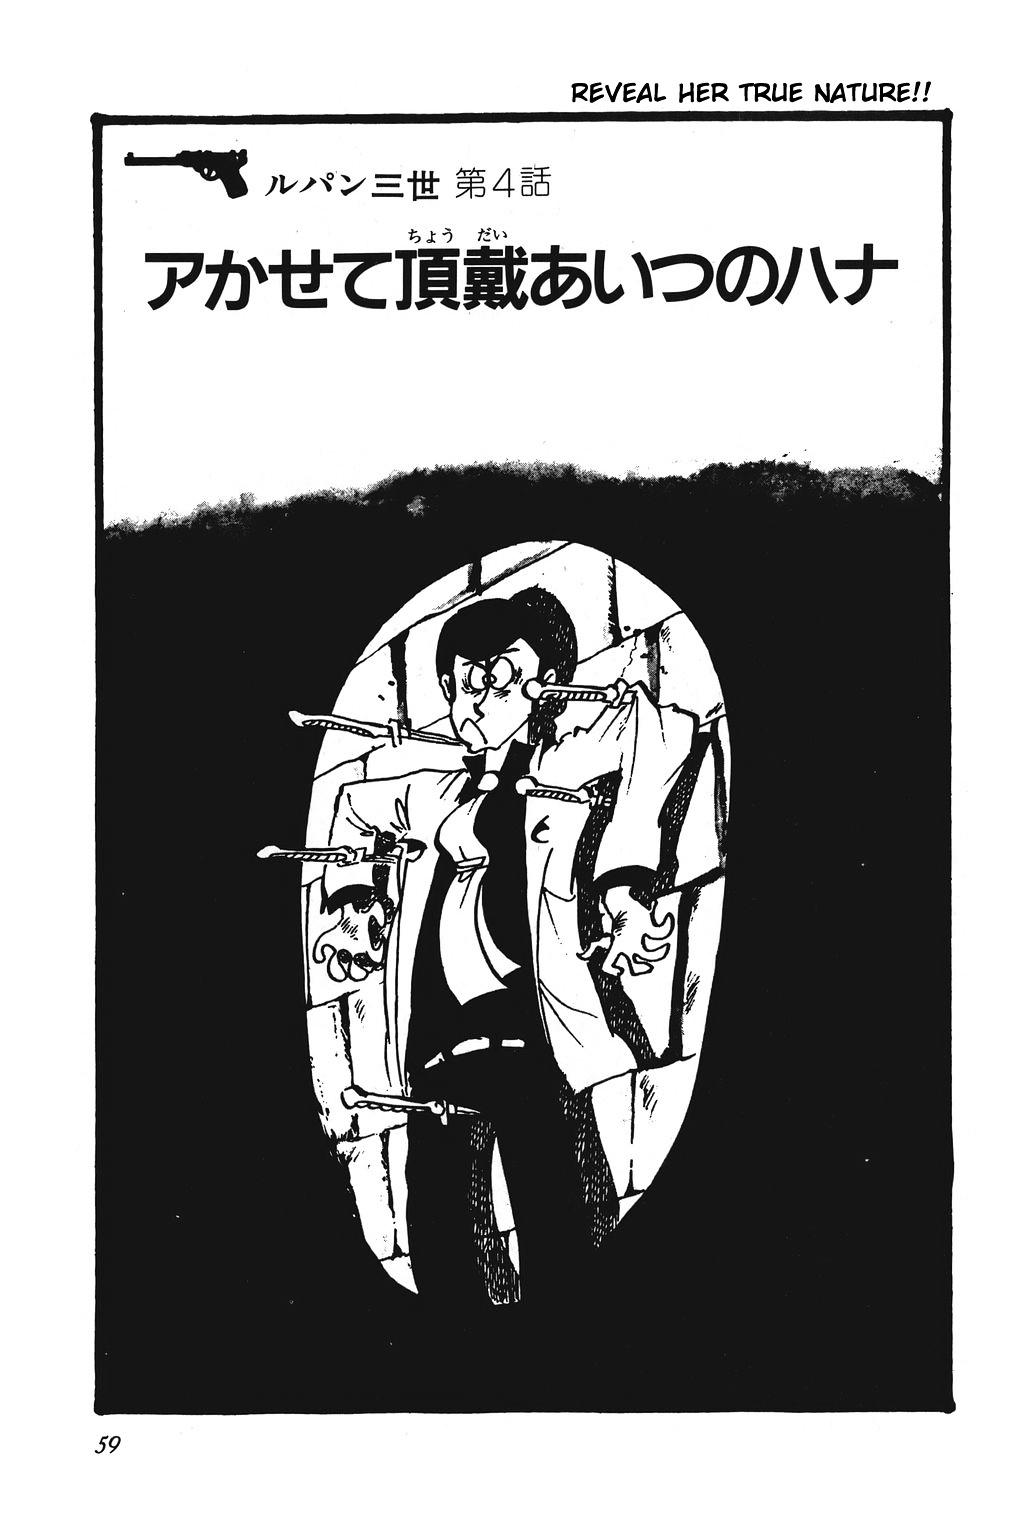 Lupin Sansei Vol.1 Chapter 4 : Reveal Her True Nature!! - Picture 1